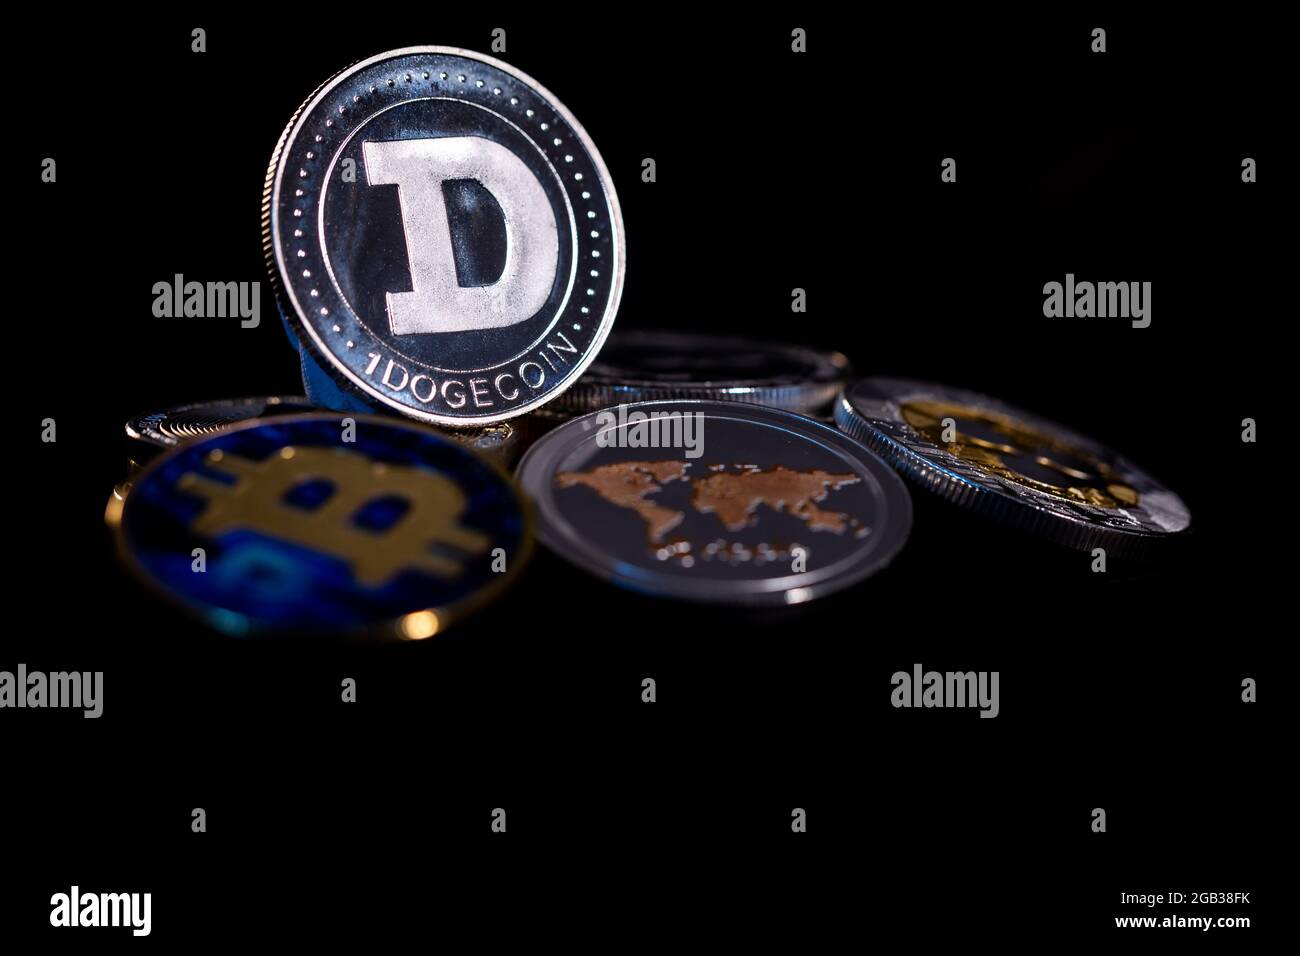 Dogecoin cryptocurrency token Stock Photo